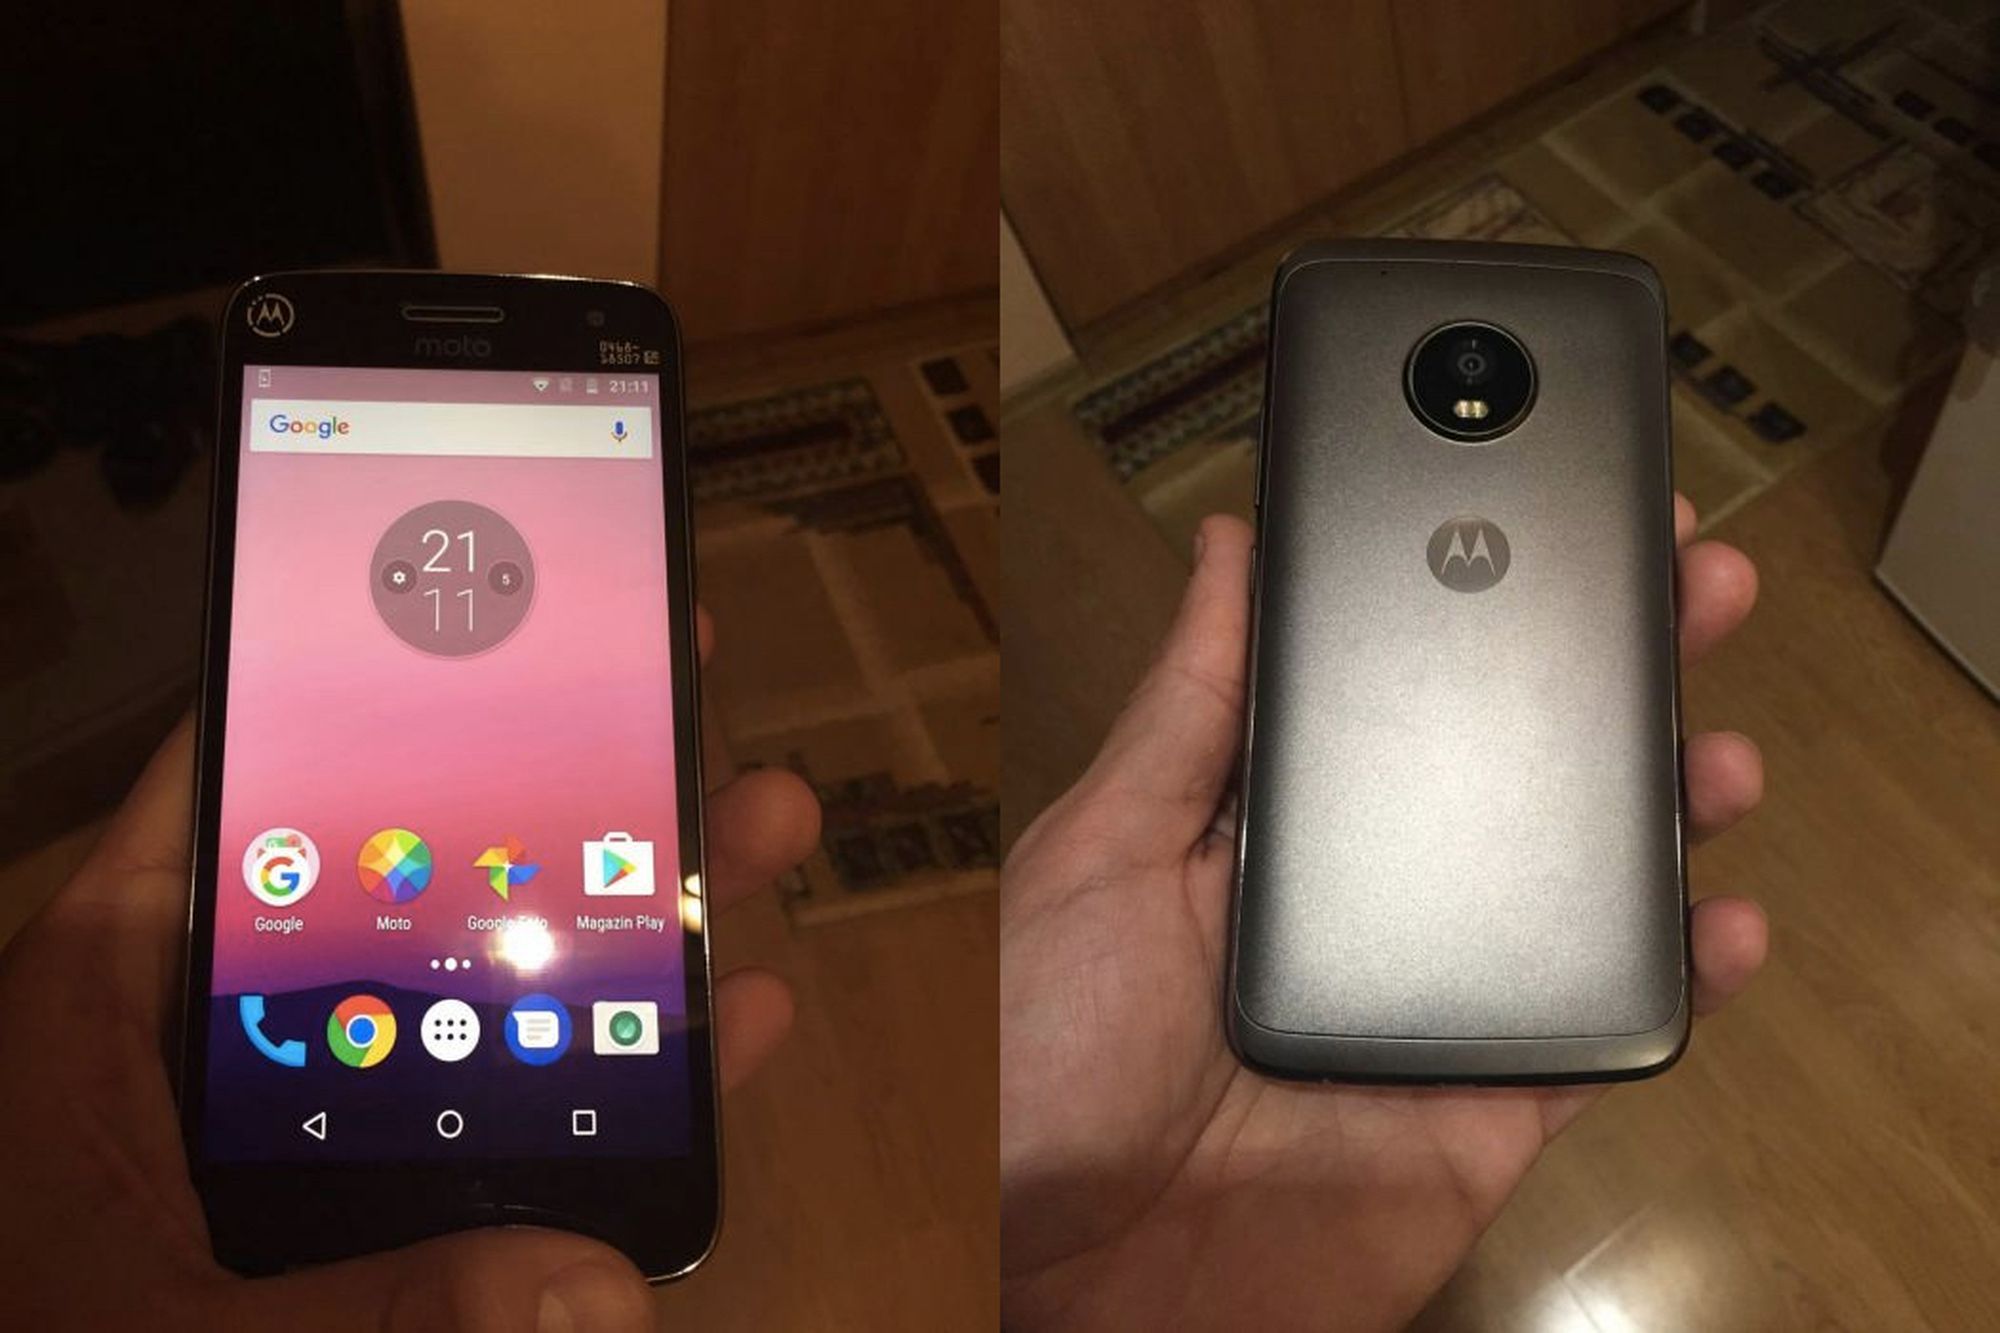 Surrey Magazijn Smerig Moto G5 Plus reportedly revealed in leaked photos - The Verge